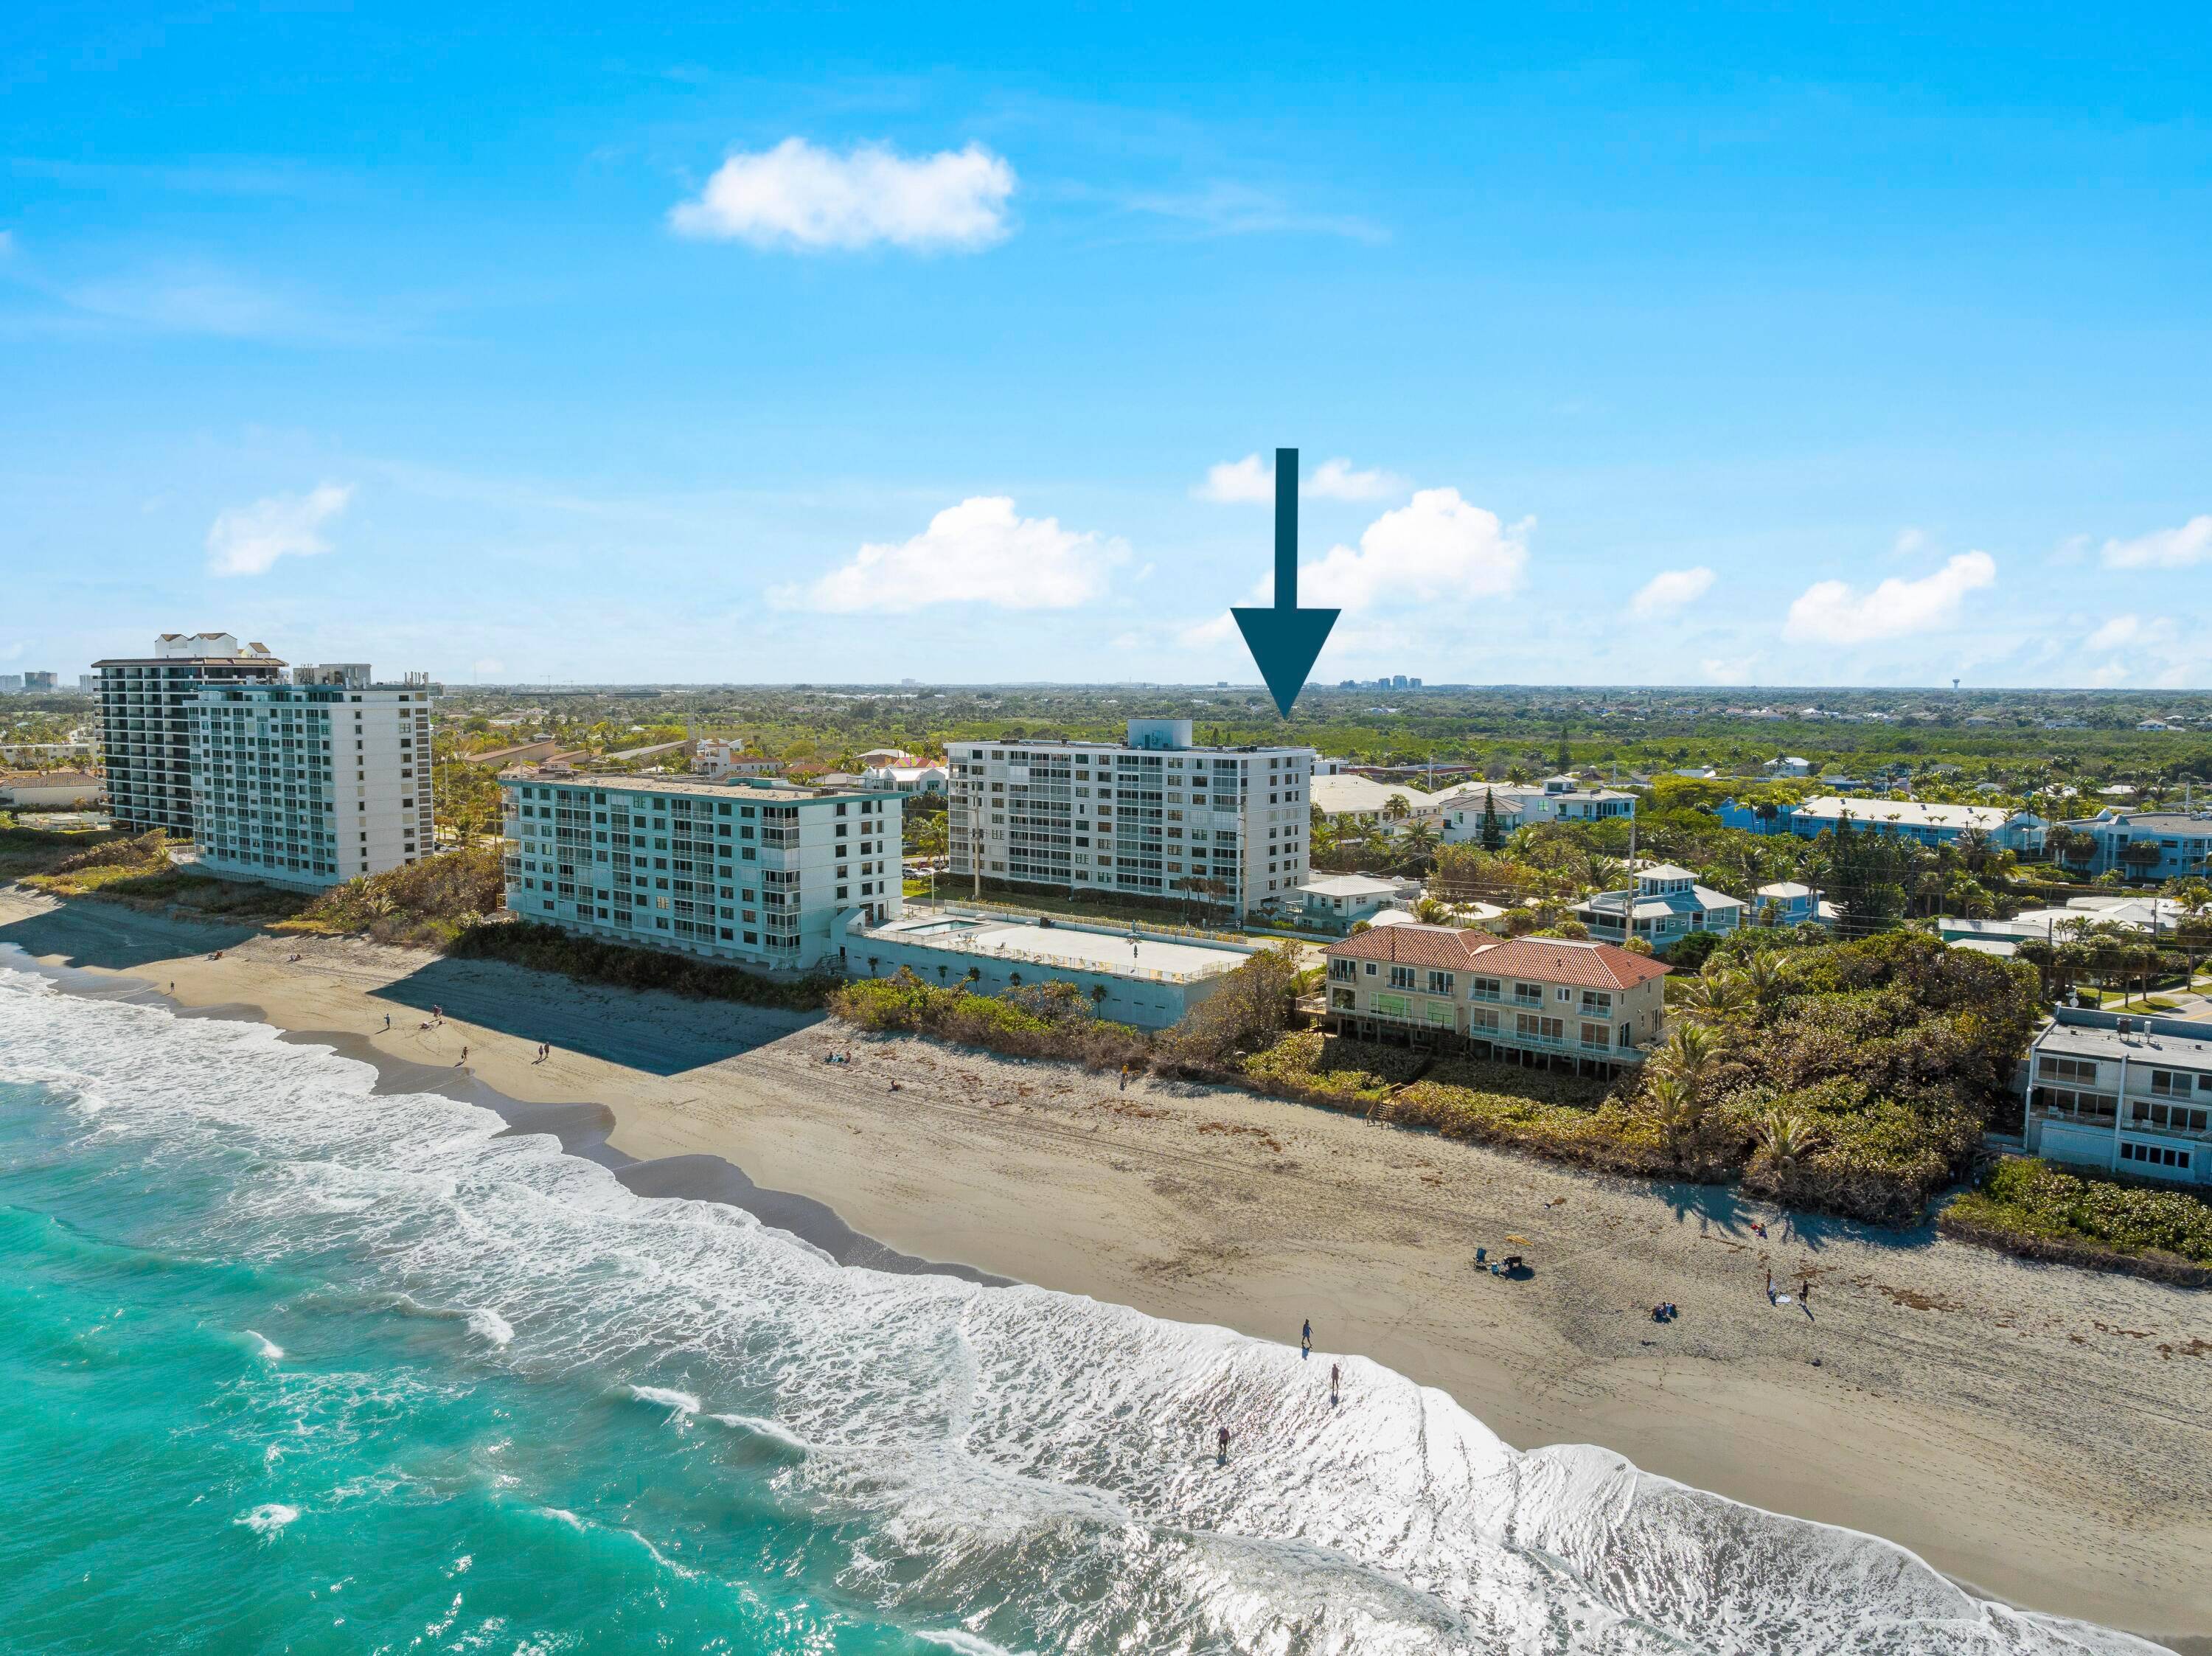 Immaculate renovated condo just steps away from Juno Beach, offering spectacular ocean views and stunning sunrises.